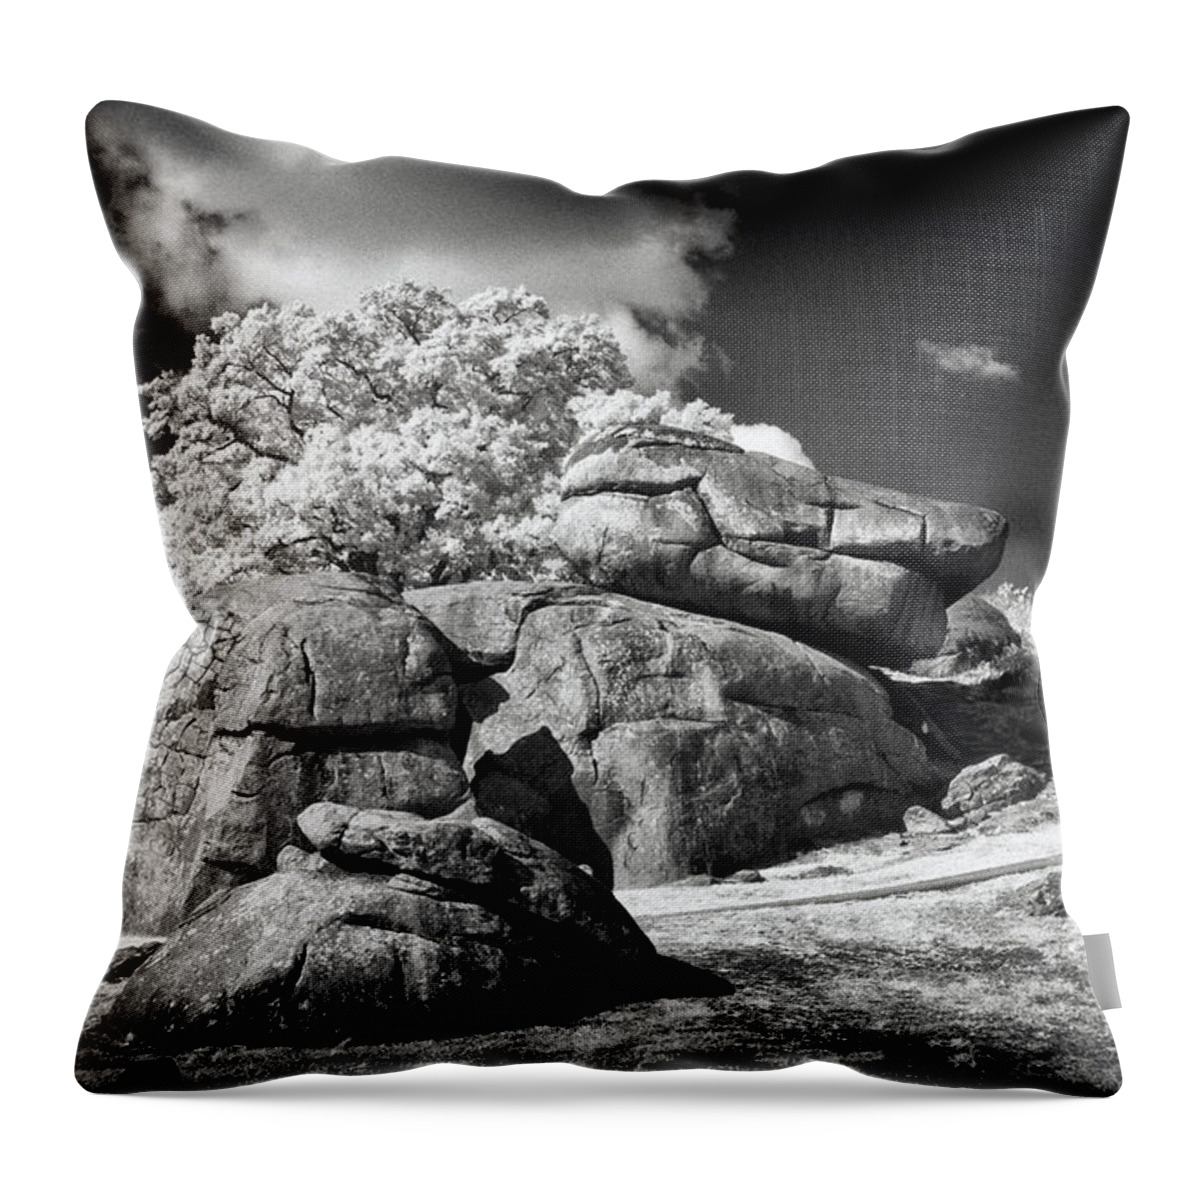 Dir-cw-0032-b Throw Pillow featuring the photograph Devils Den - Gettysburg by Paul W Faust - Impressions of Light